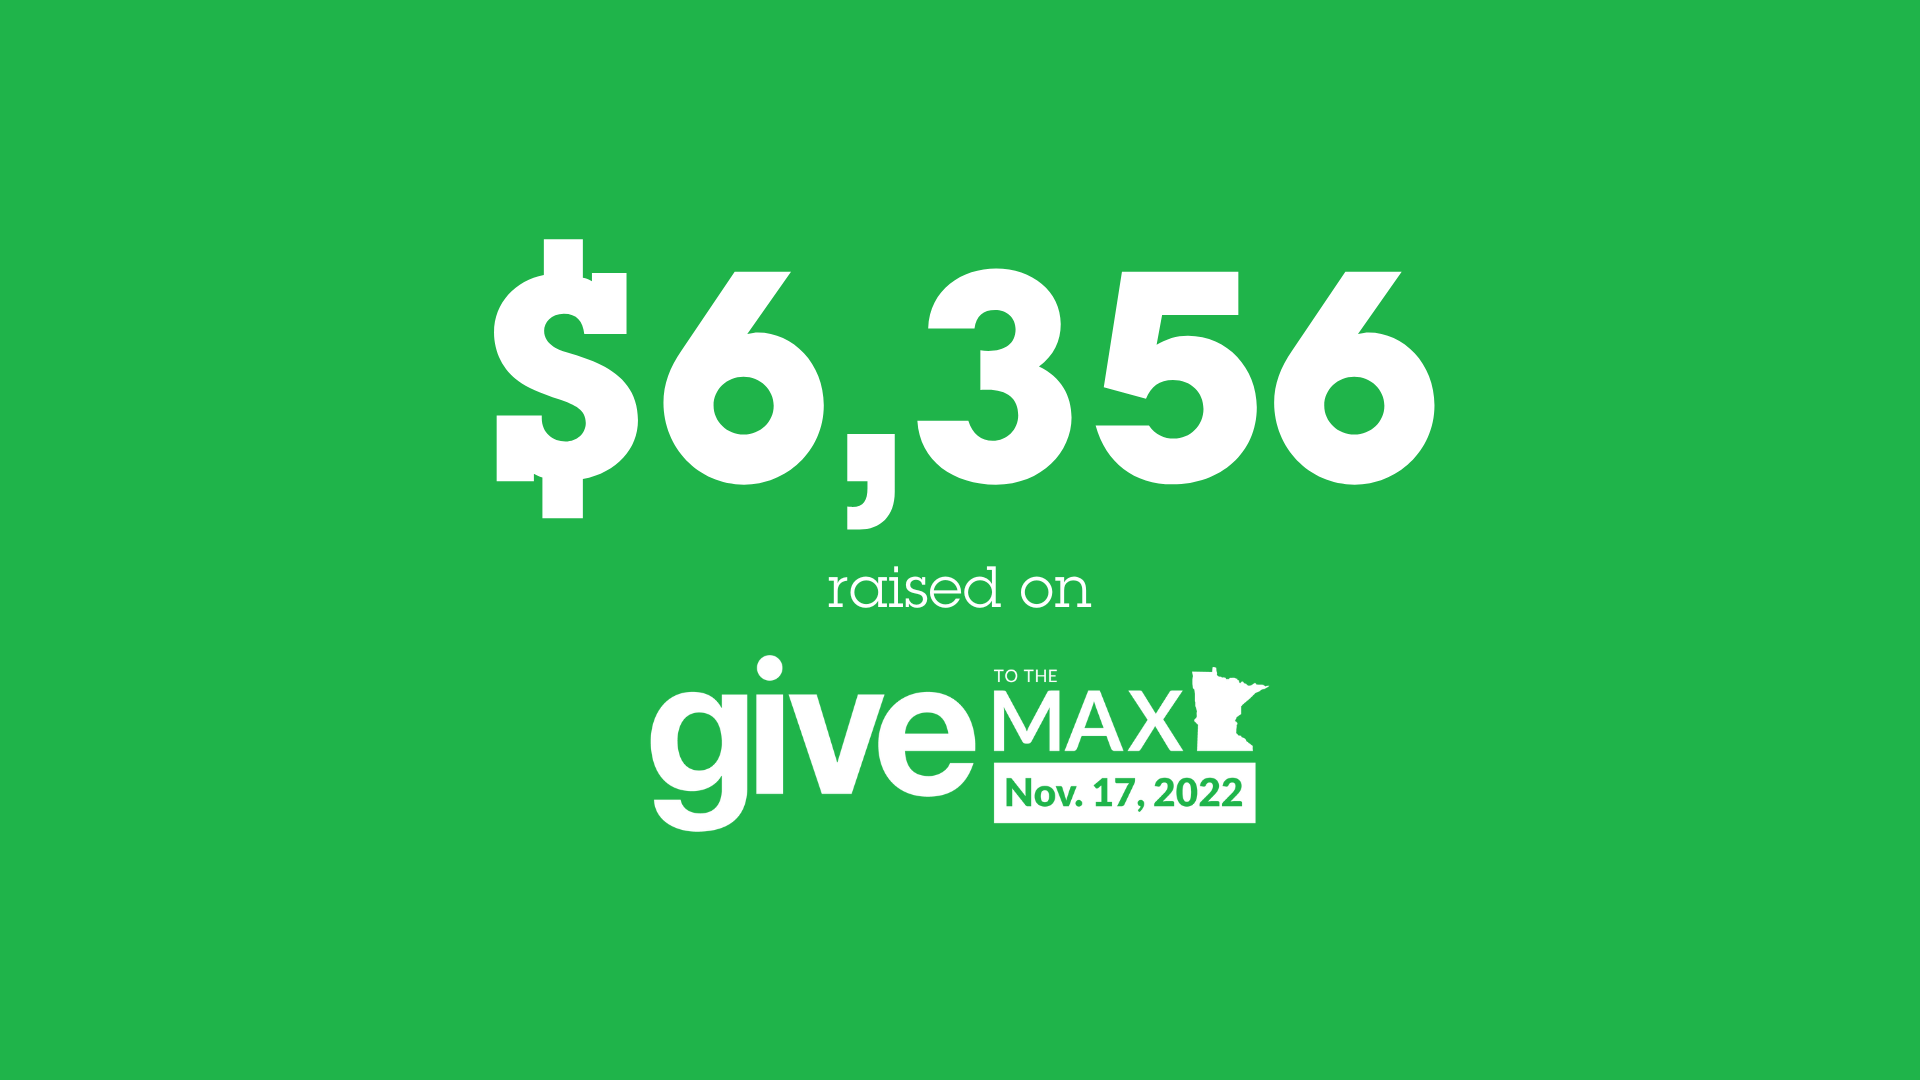 Employee-advised giving on Give to the Max Day